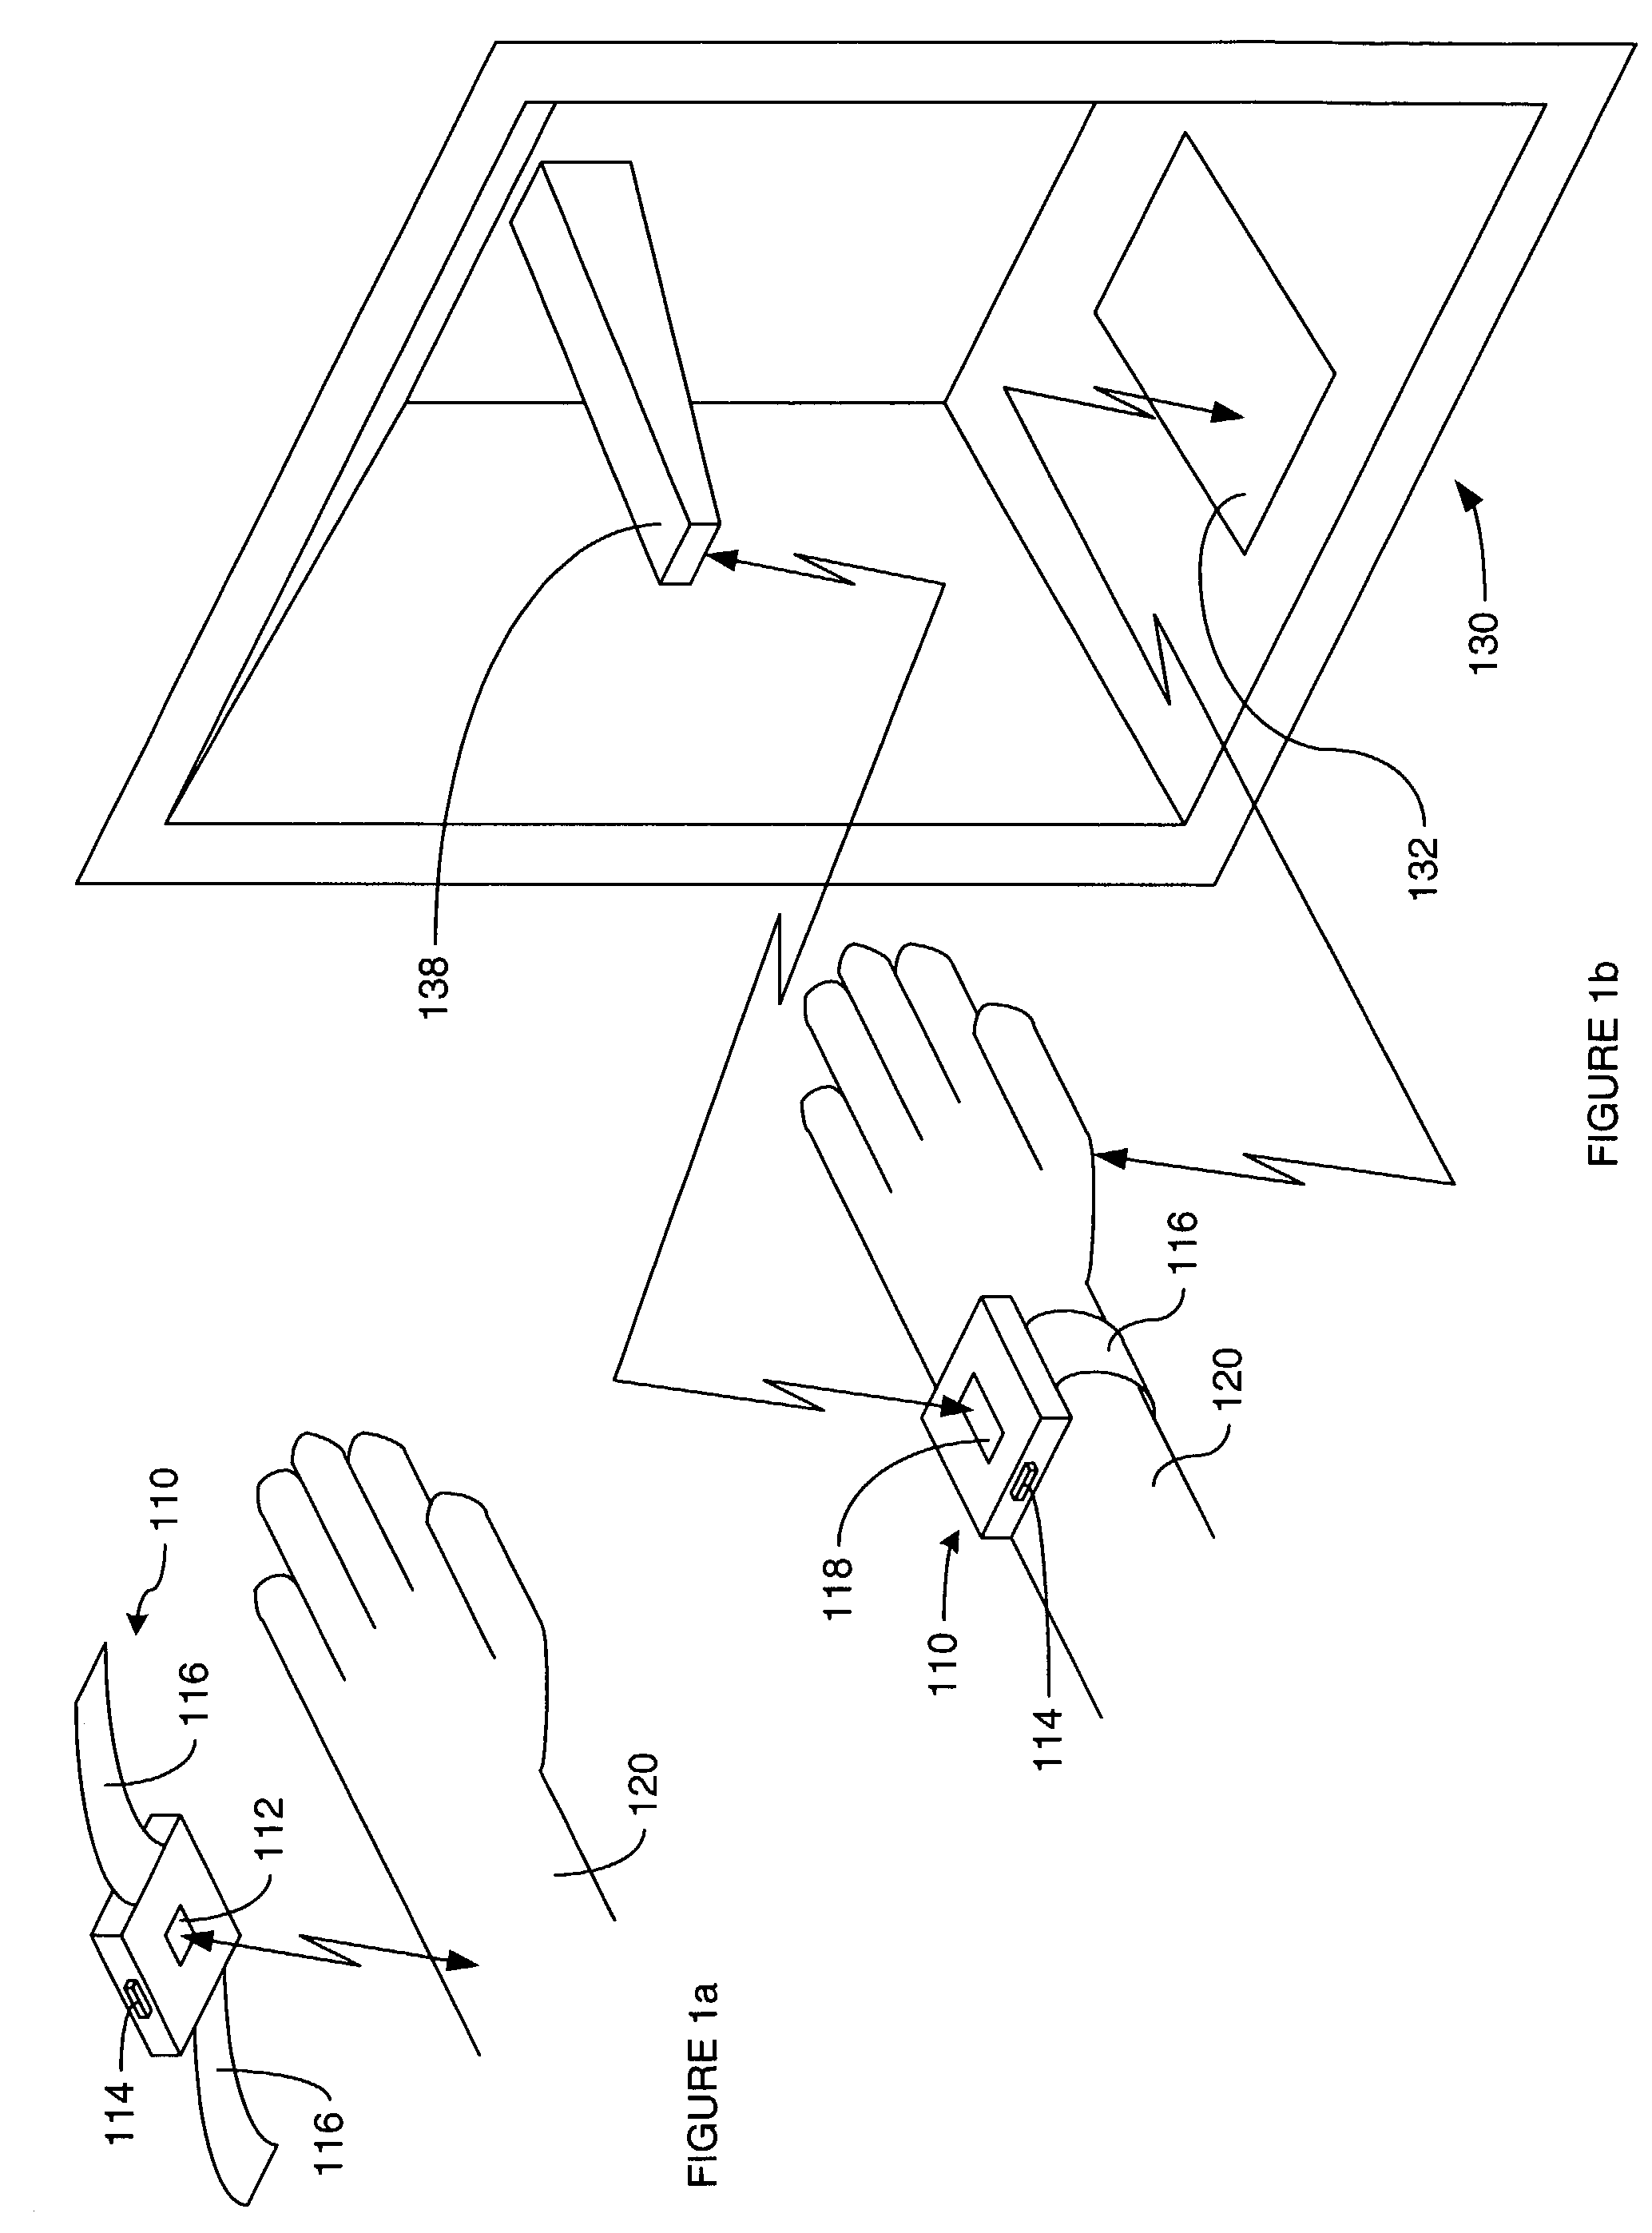 Personal authentication method and apparatus sensing user vicinity